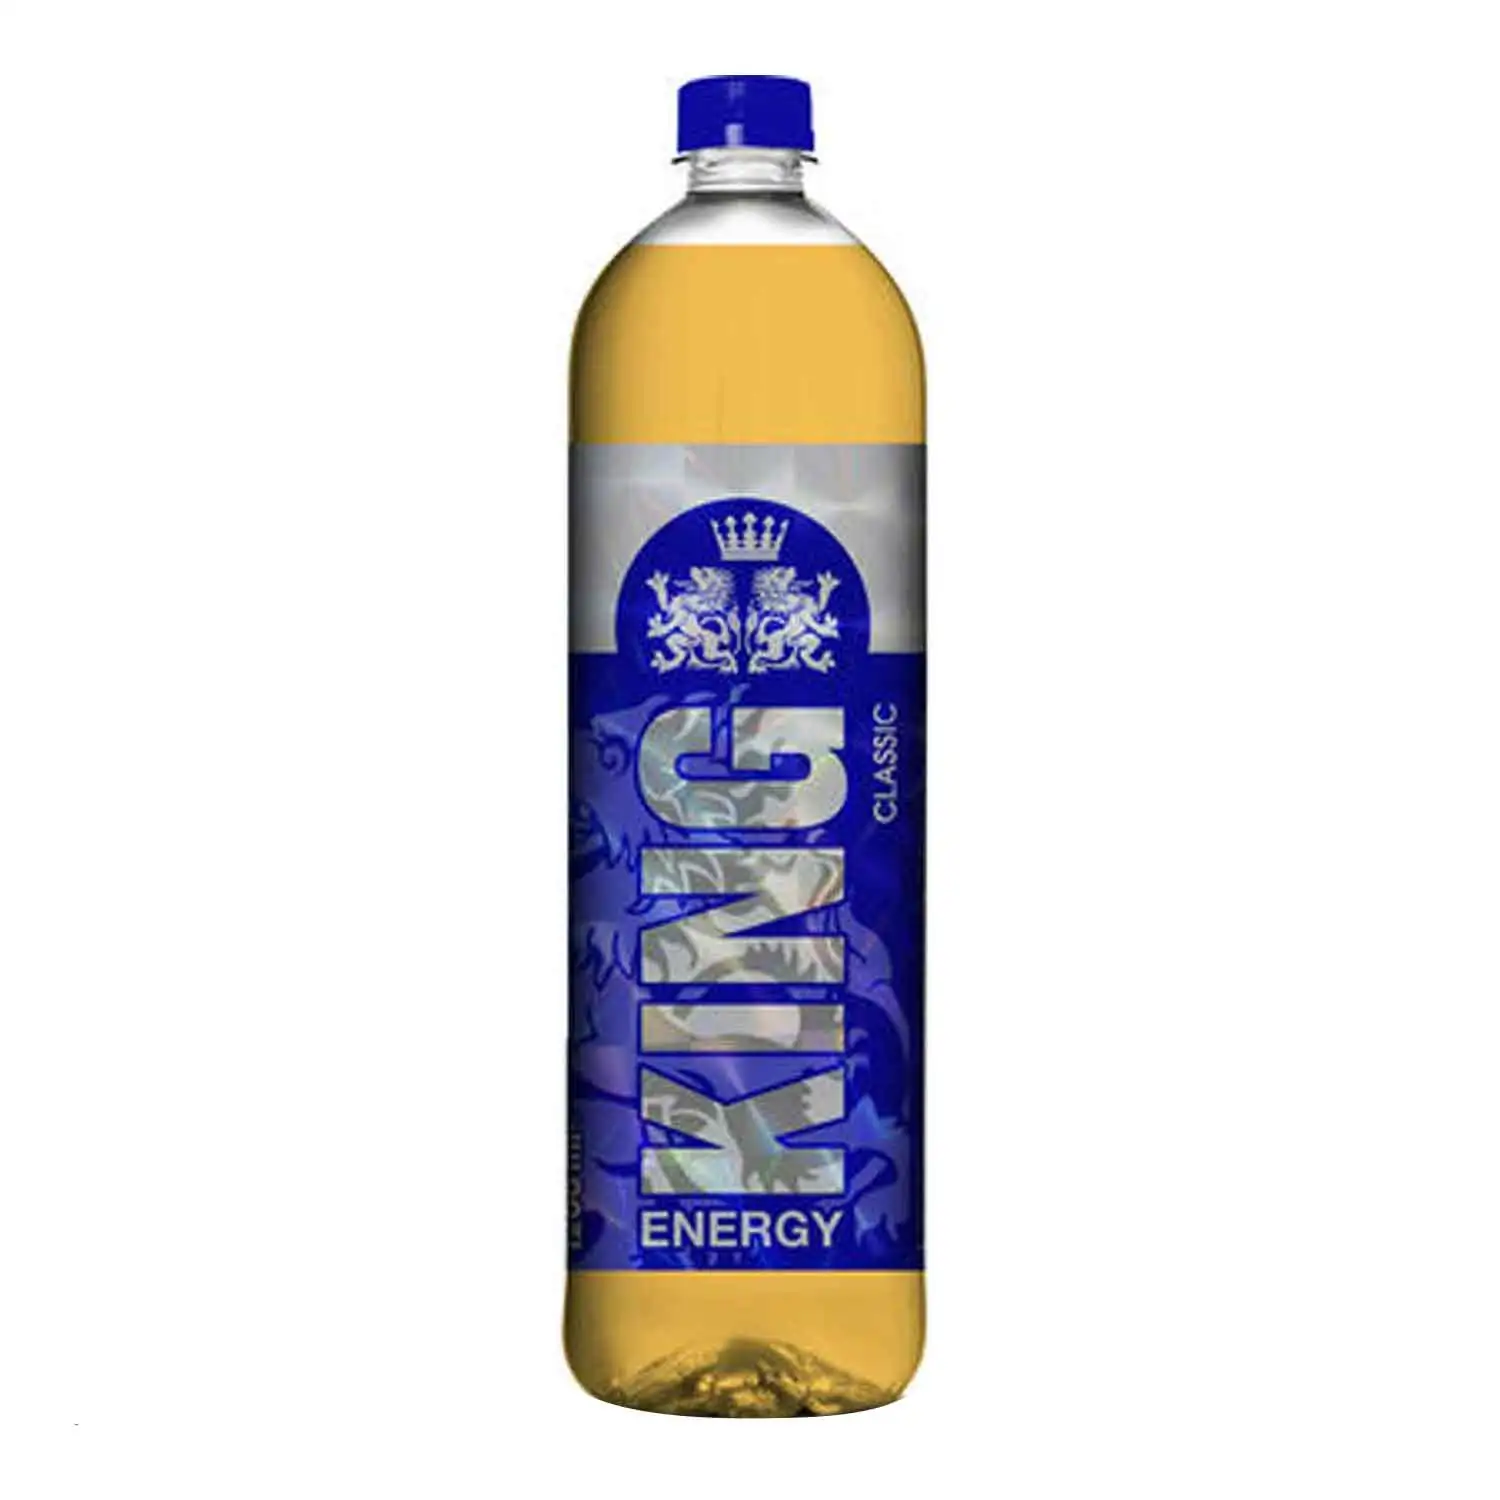 King energy 1,2l - Buy at Real Tobacco